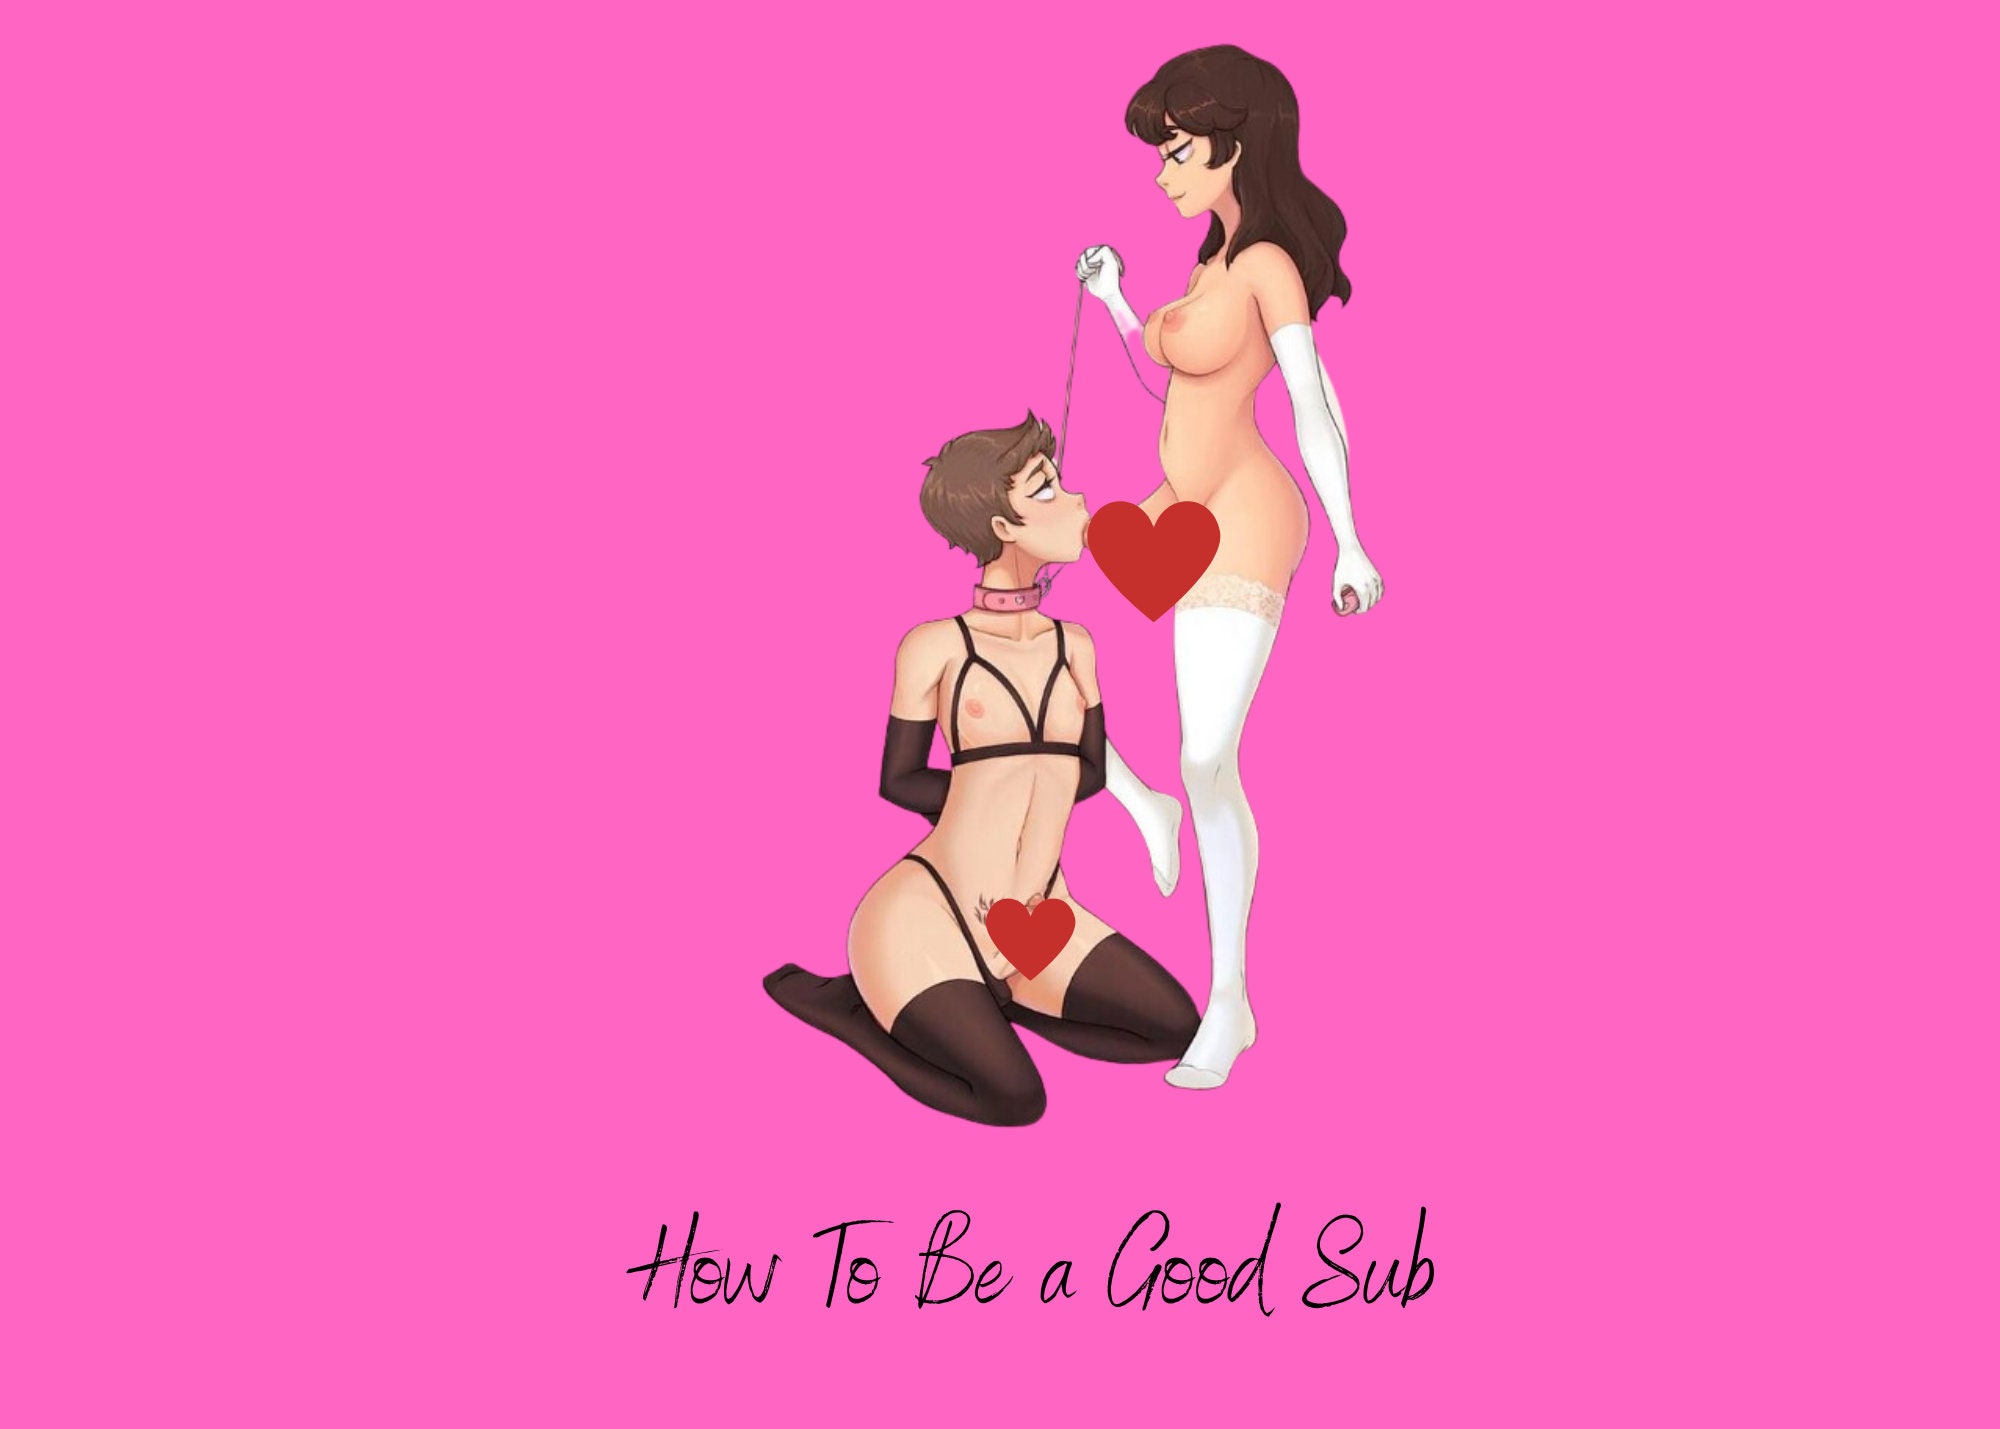 Submissive Sissy hq photo